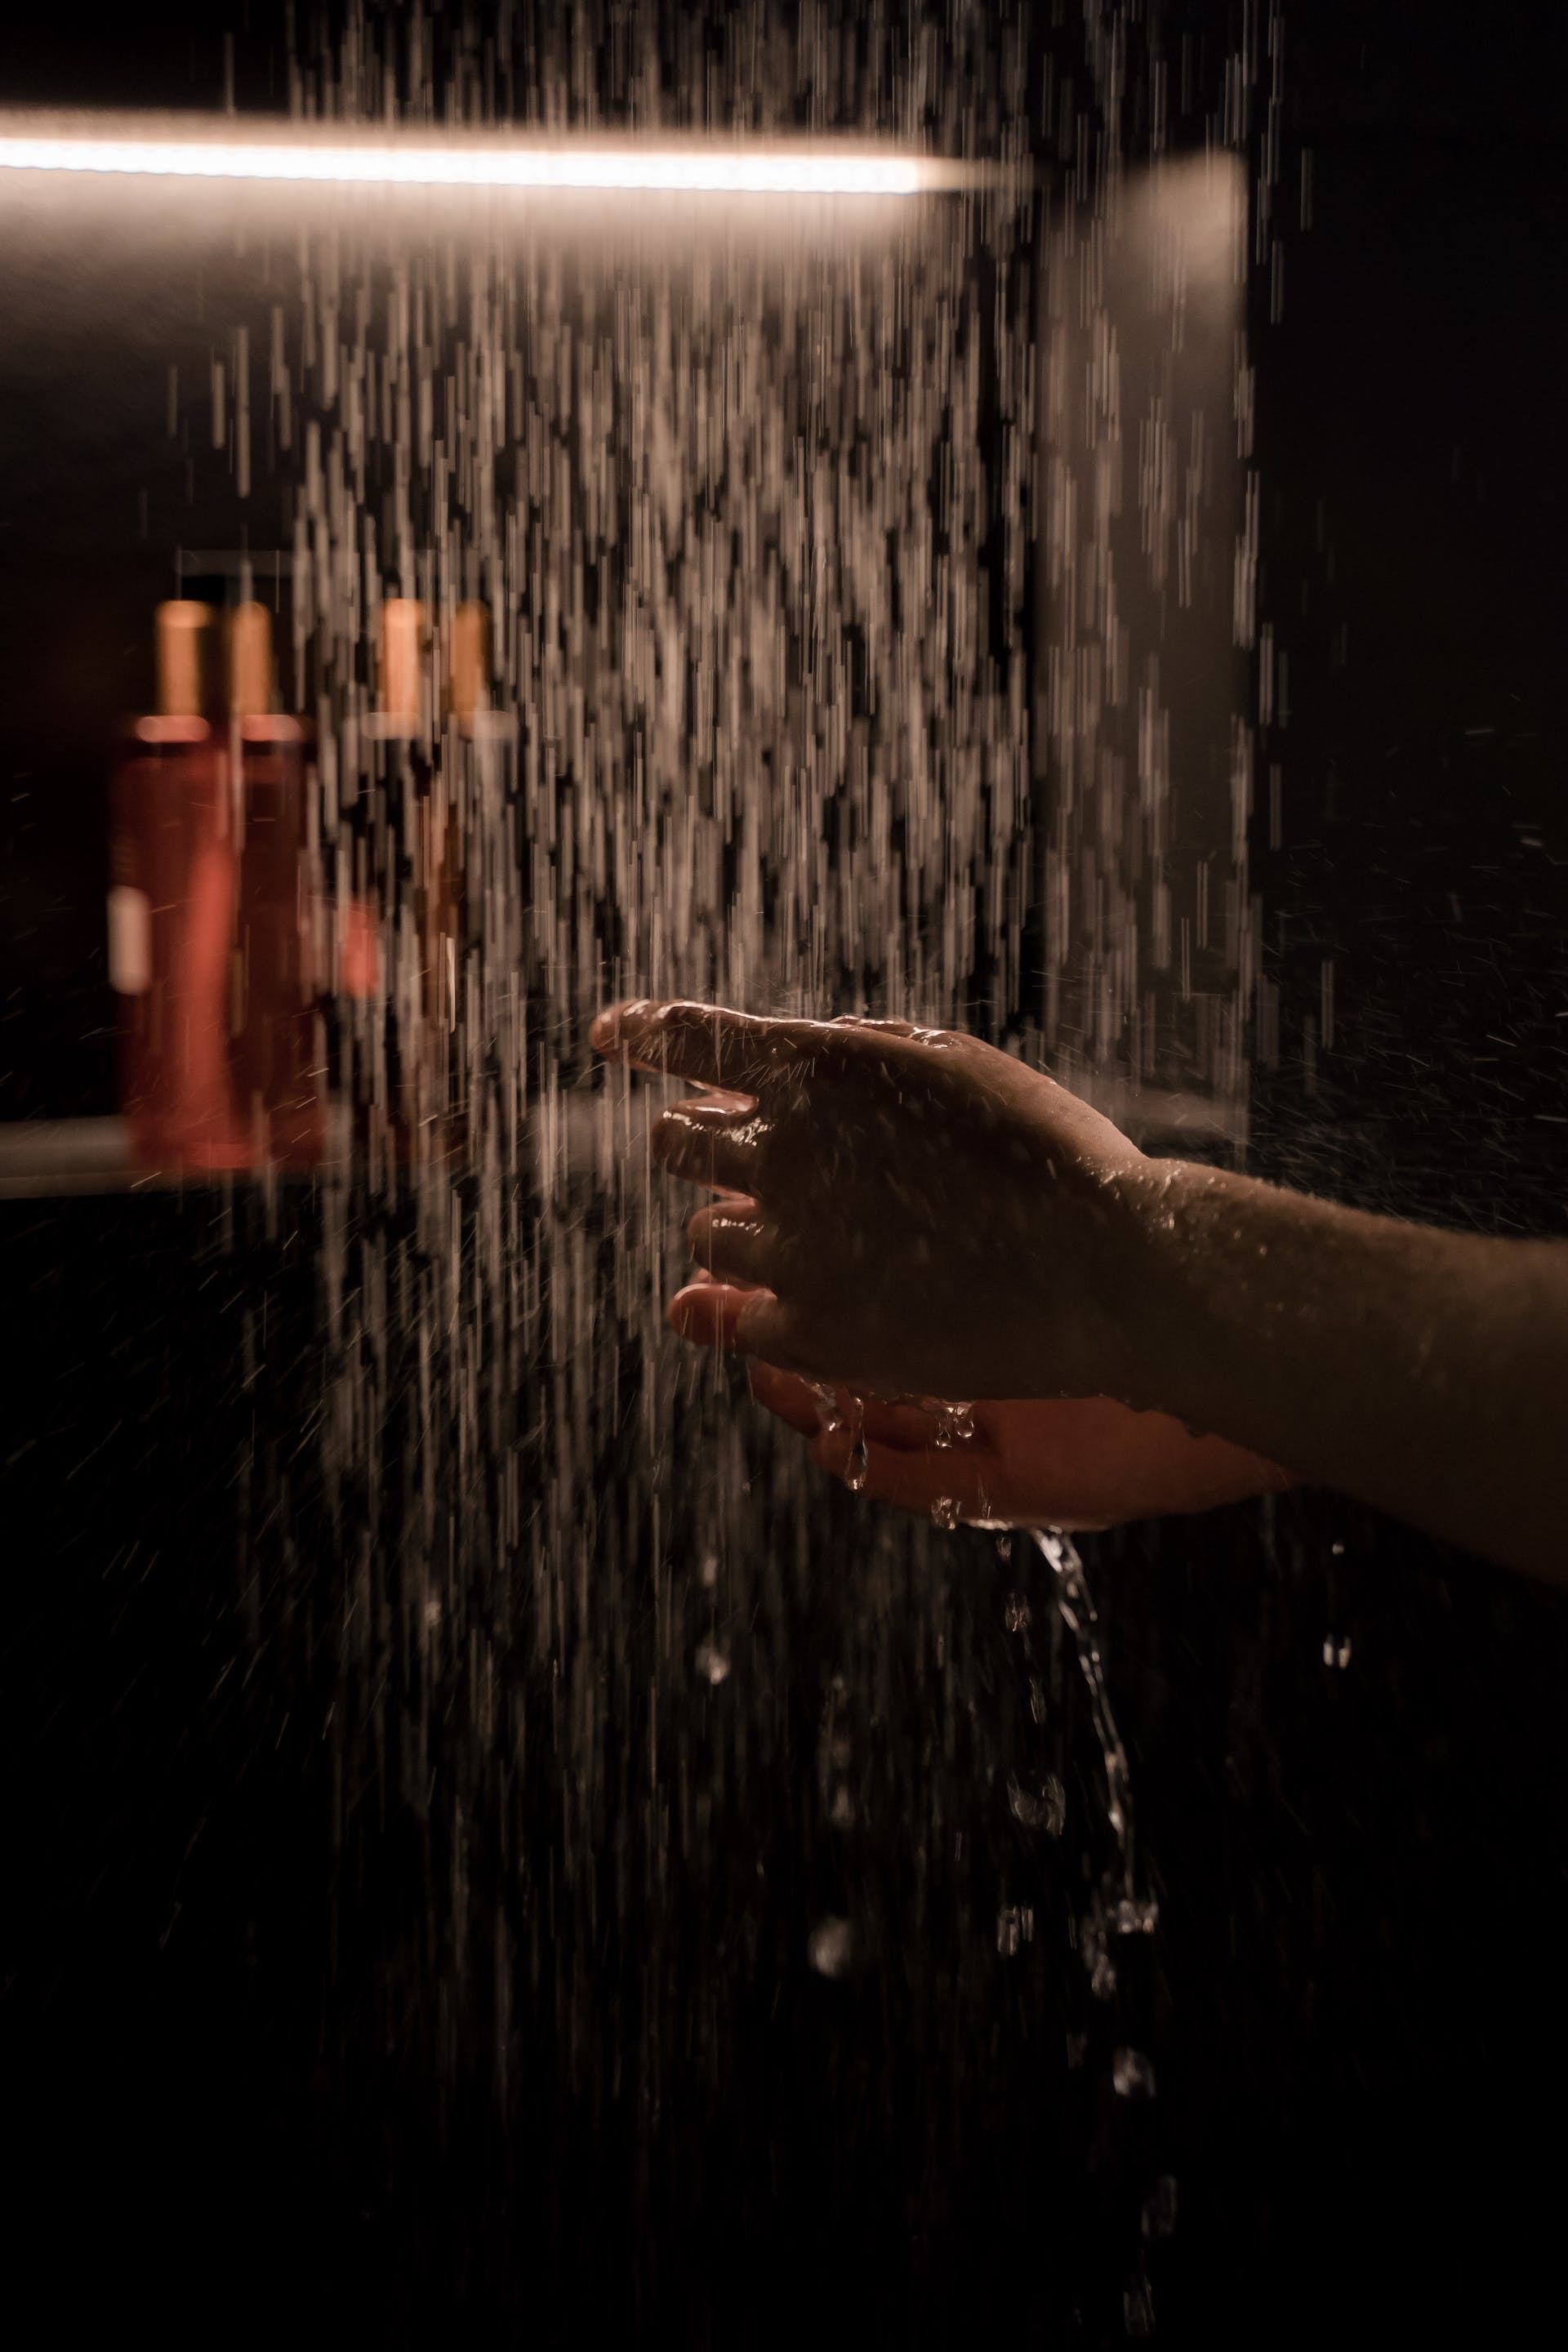 A person's hand in the shower | Source: Pexels